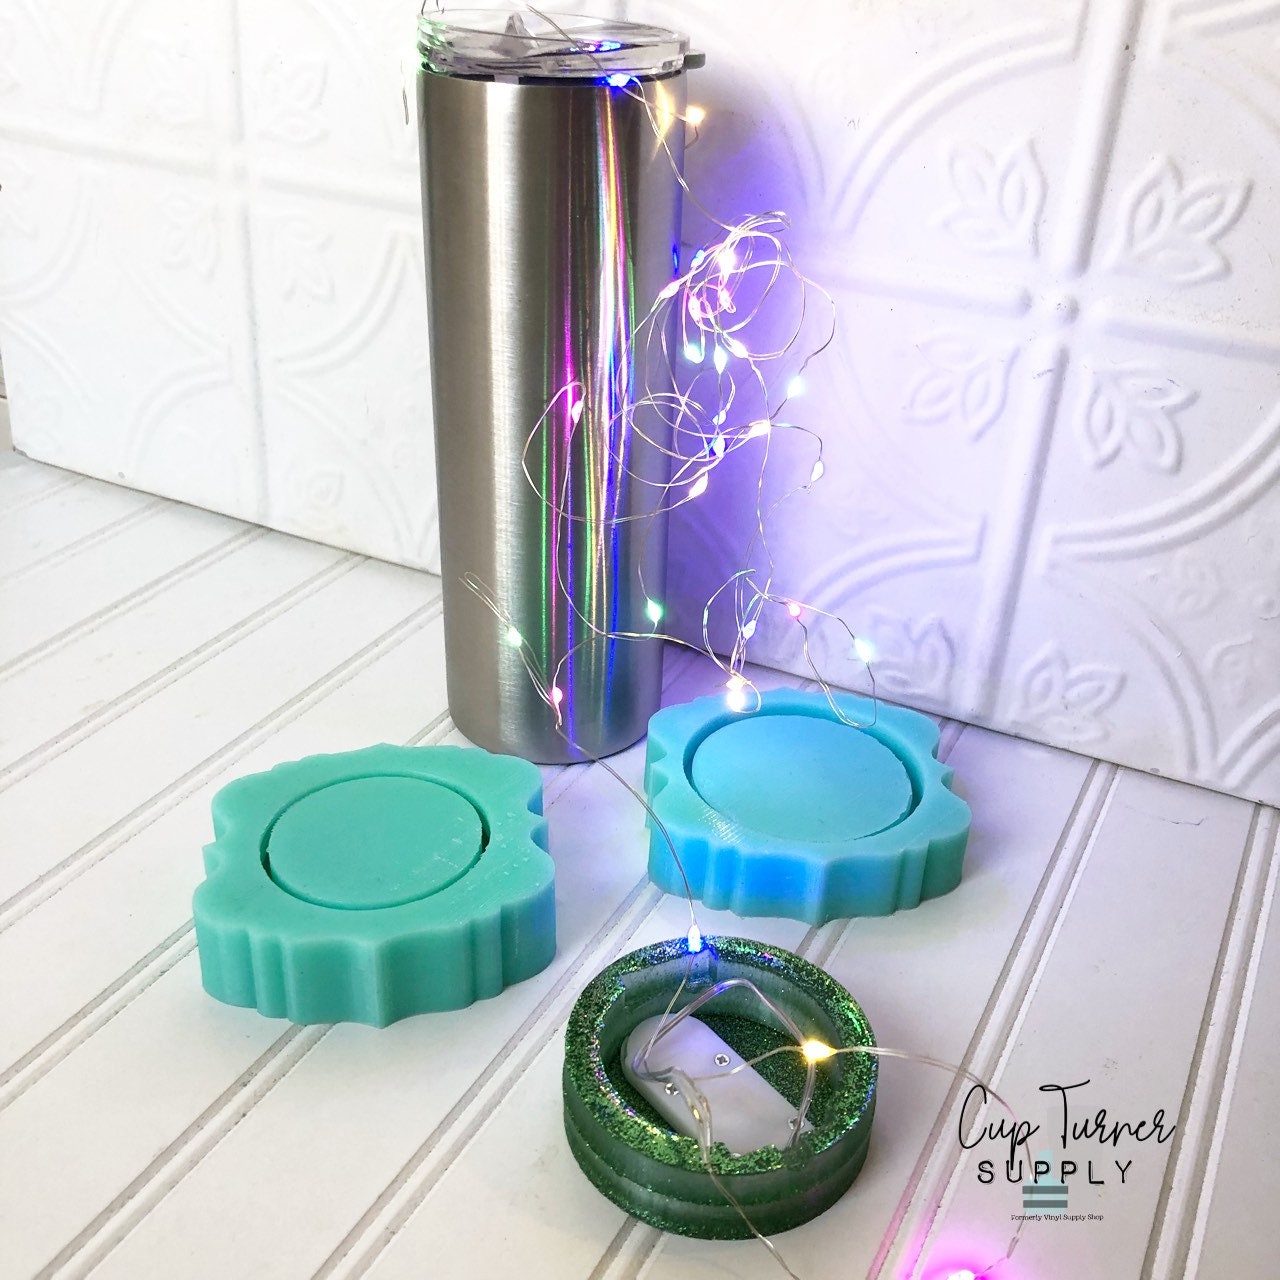  Tumbler Holder & Cup Turner Crafts, DIY Glitter Epoxy Tumblers  Kit with Cup Drying Stand, Rack Holder & Accessories for Perfect Tumblers